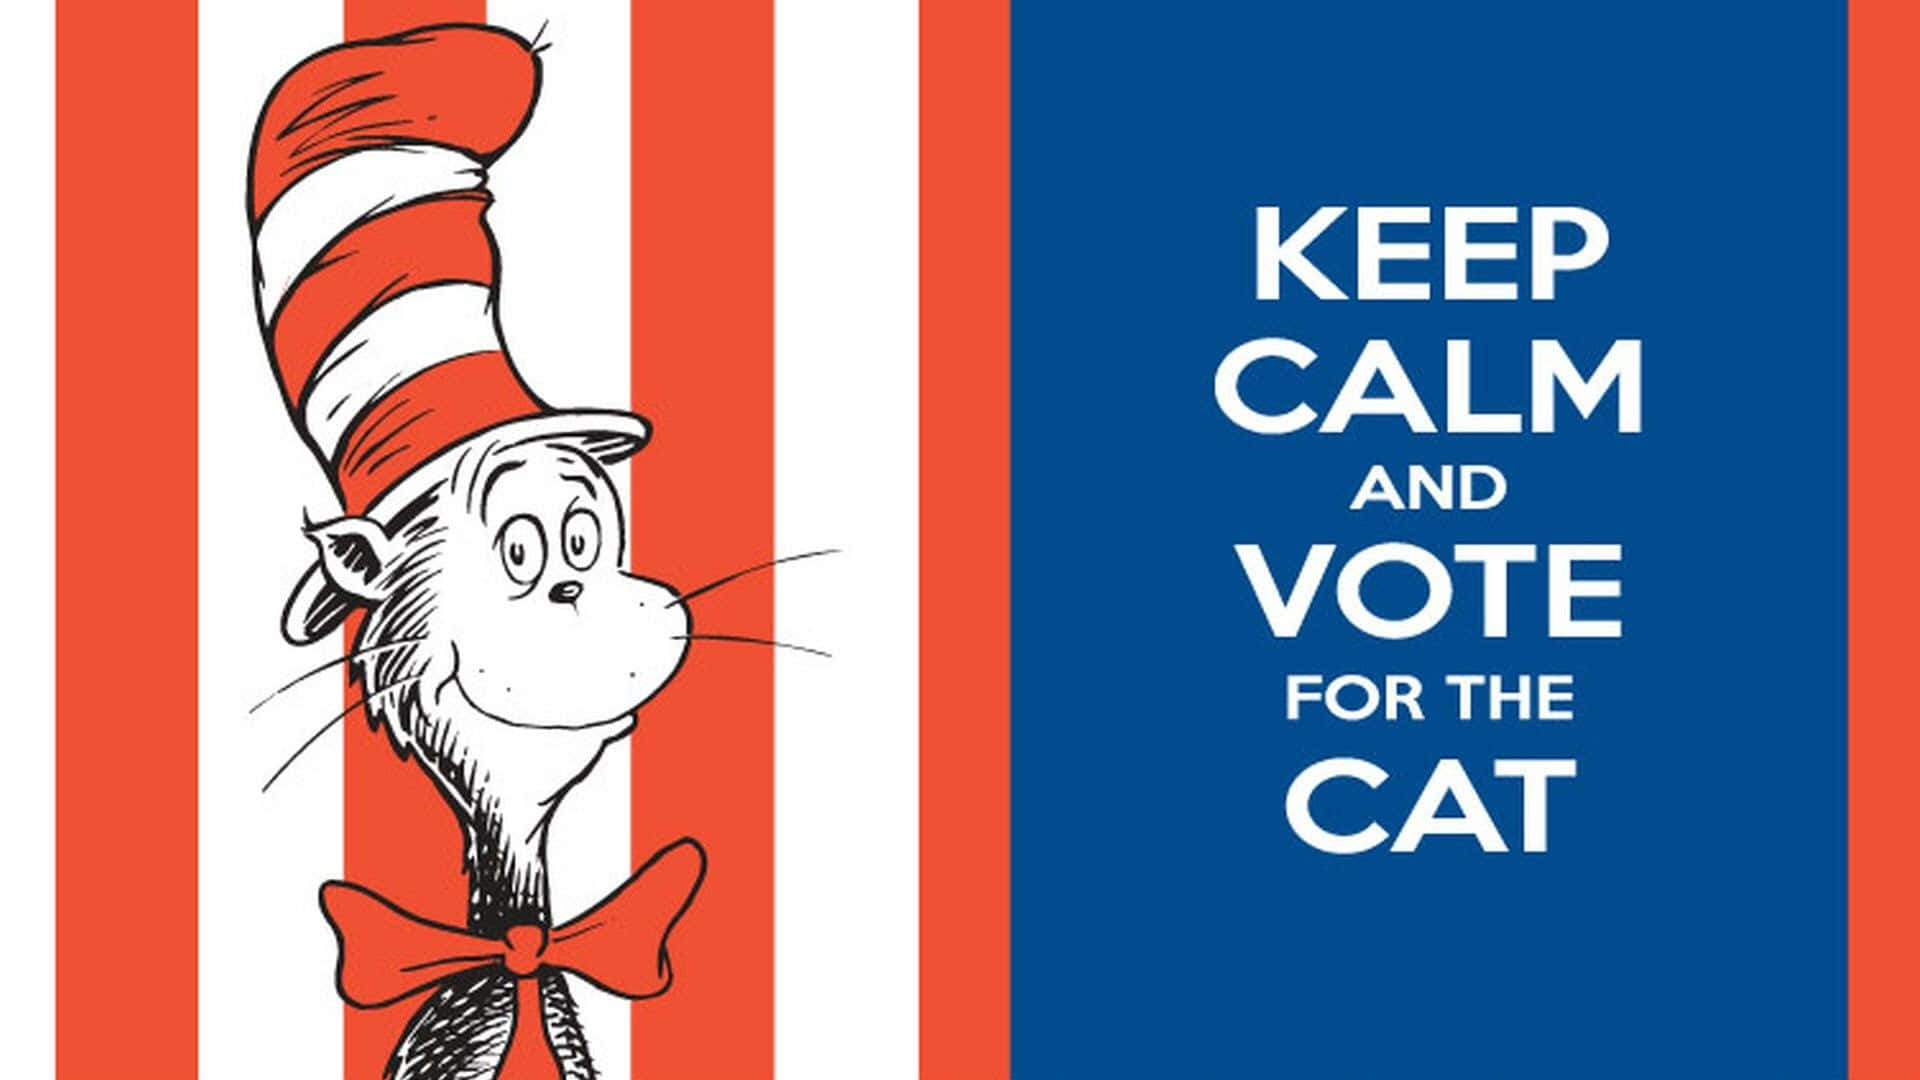 A Poster With Dr Seuss In The Cat's Hat And The Words Keep Calm And Vote For The Cat